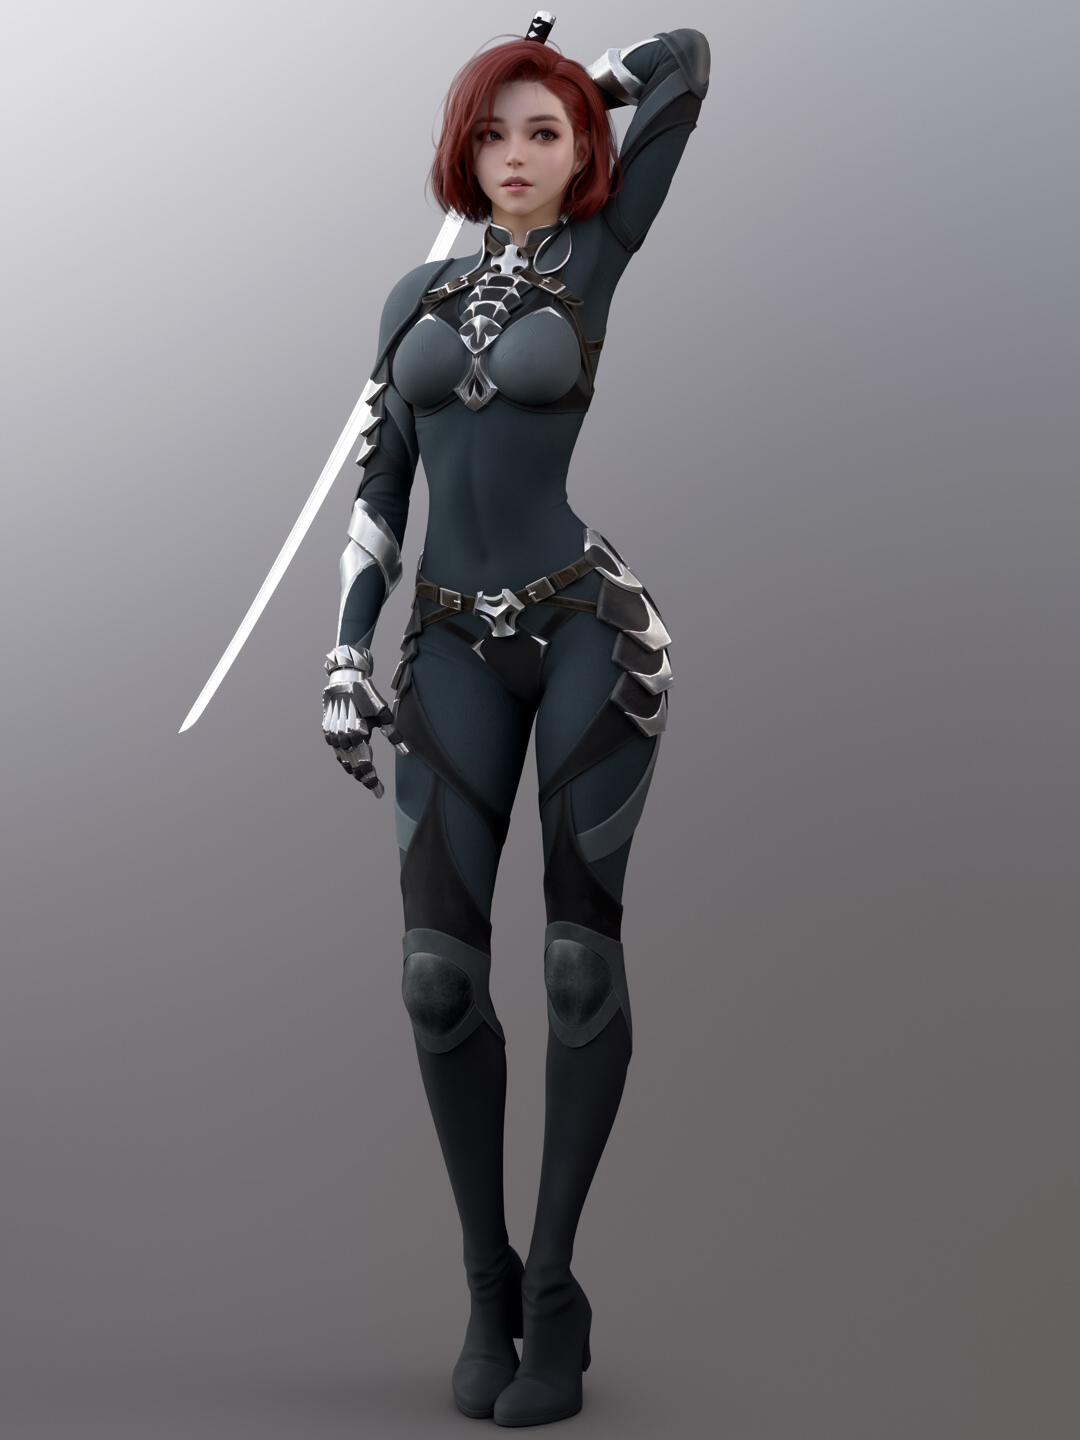 General 1080x1440 Shin JeongHo CGI women redhead short hair looking away suits weapon katana simple background gray background women with swords standing